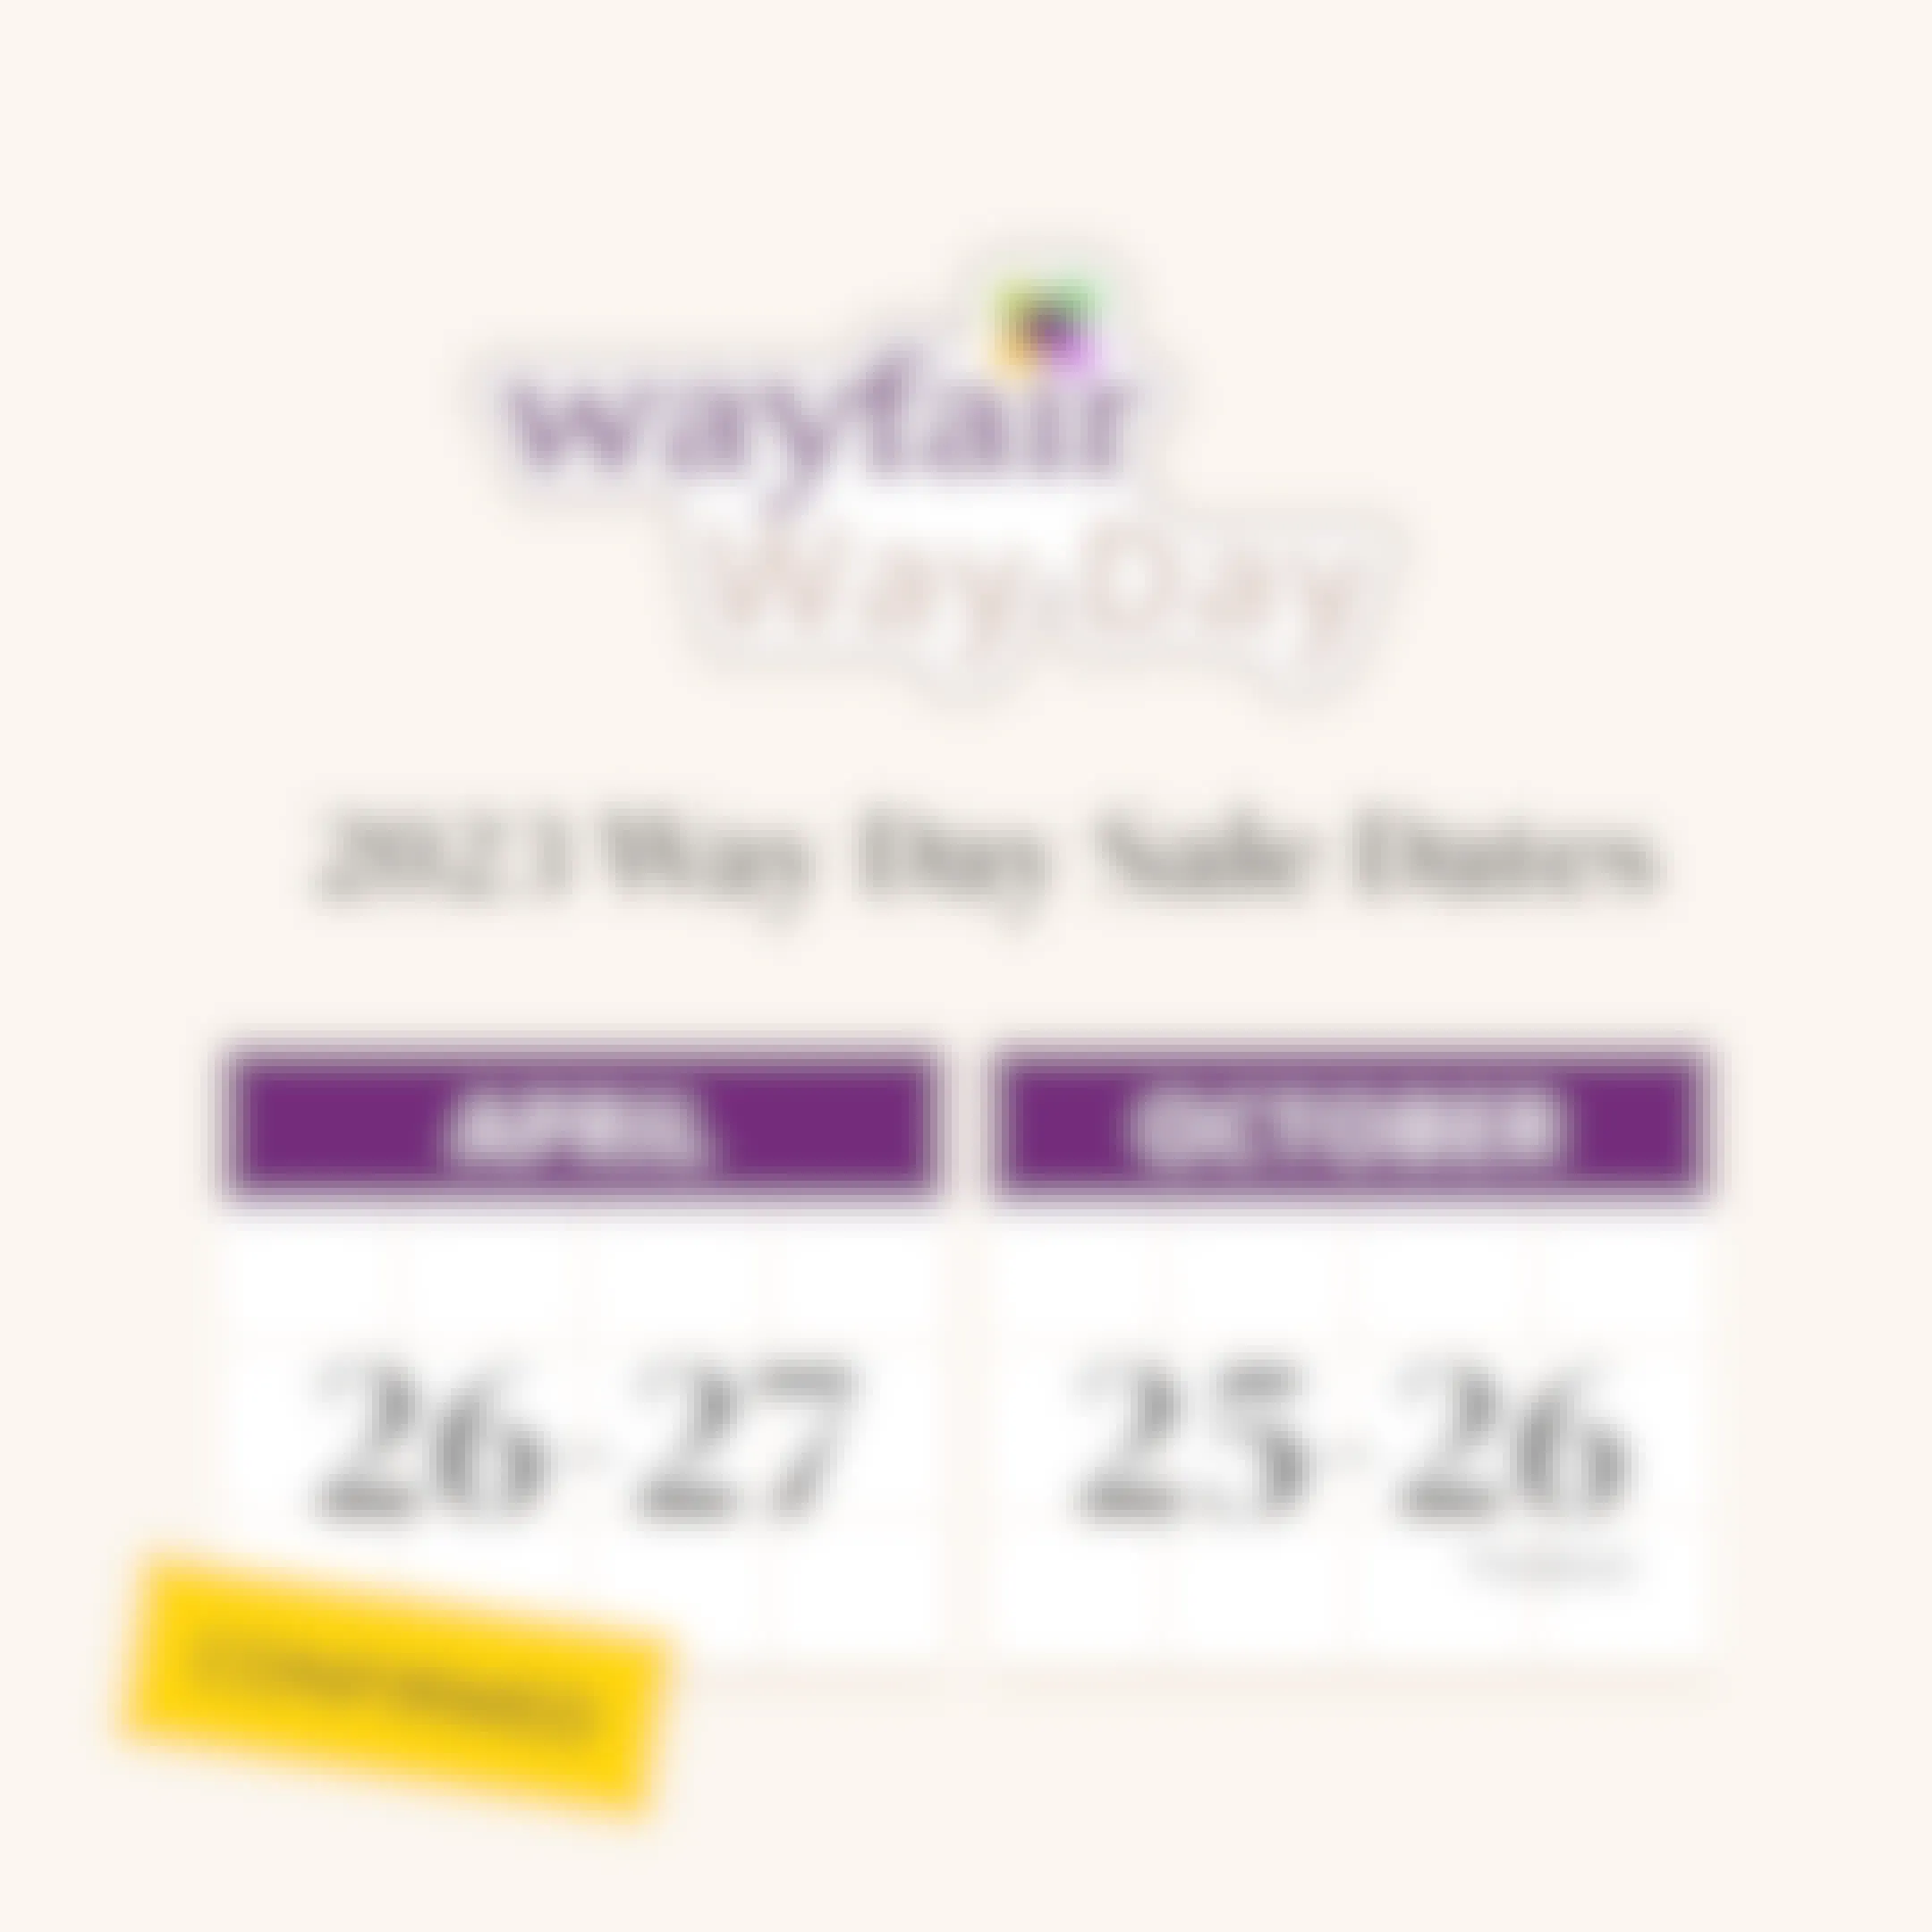 A graphic showing the Wayfair Way Day sale dates